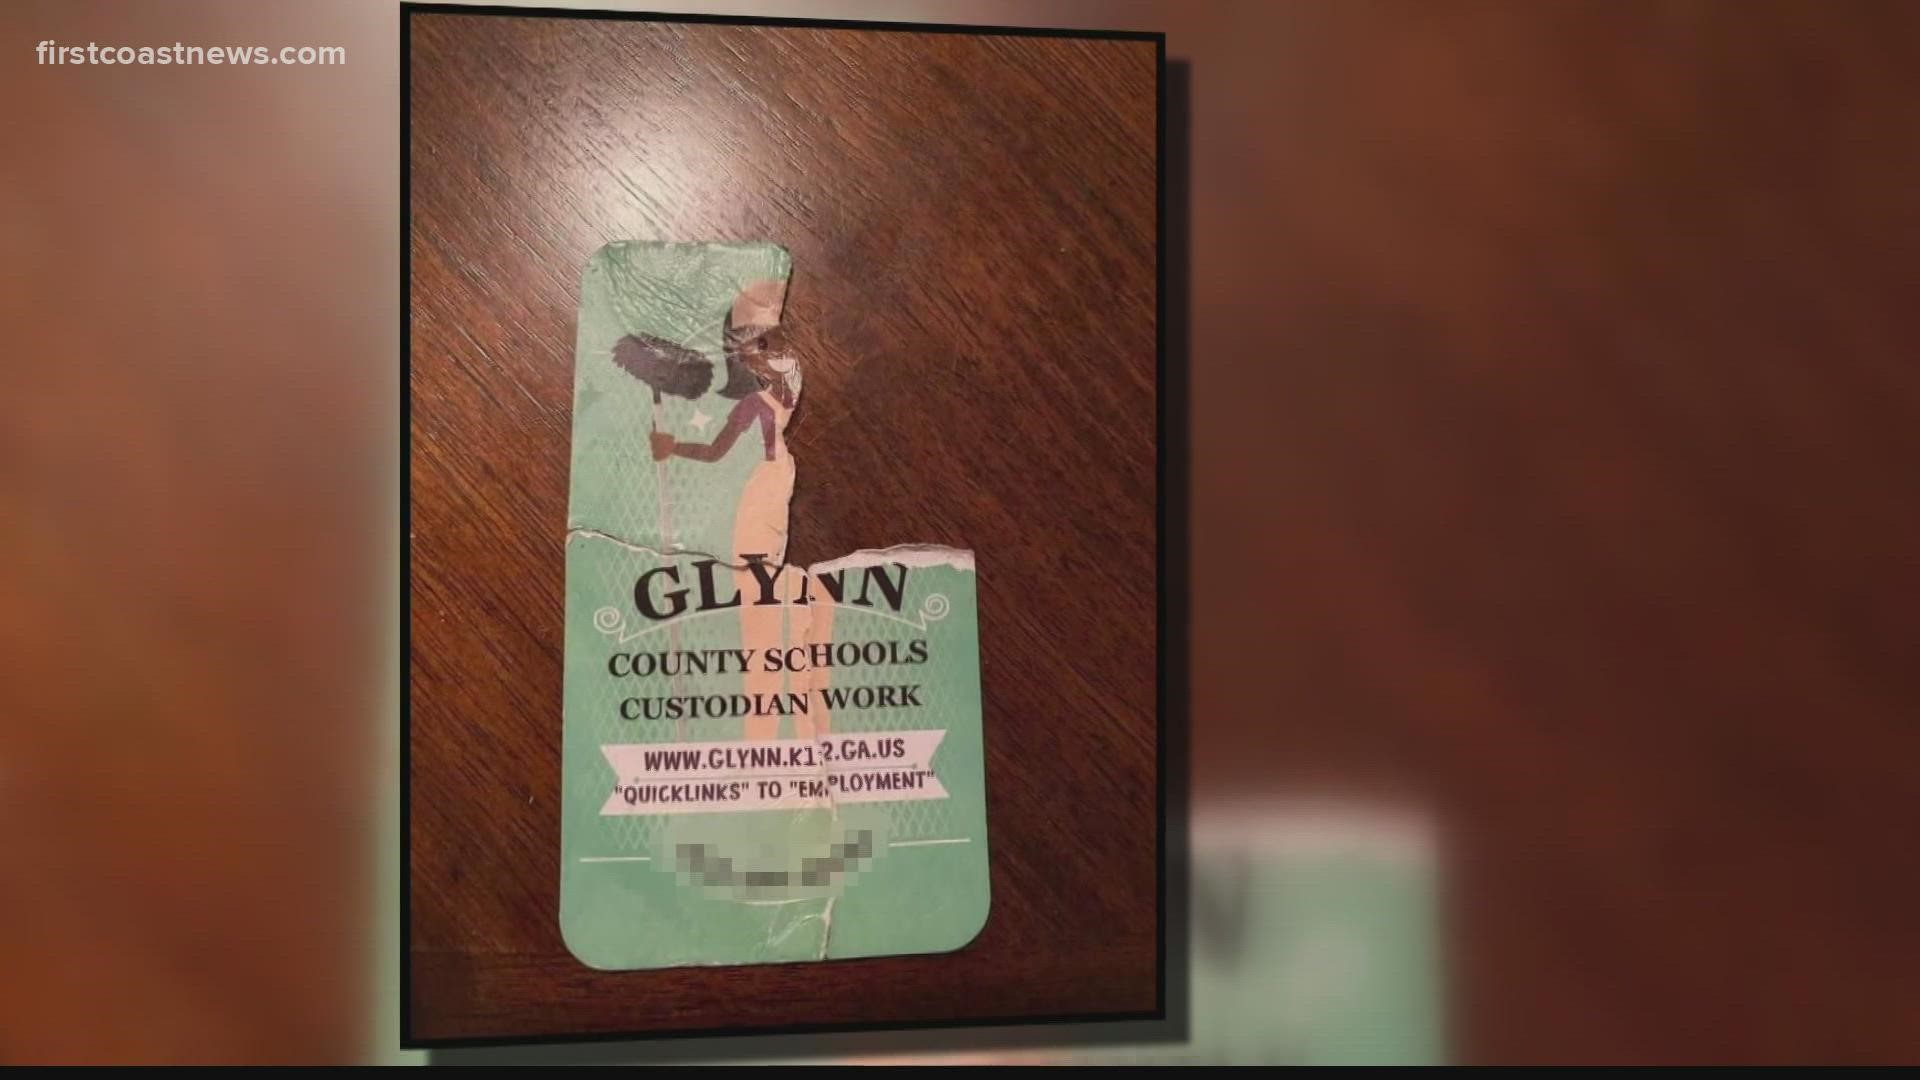 The school district said it was not a part of the flyer.